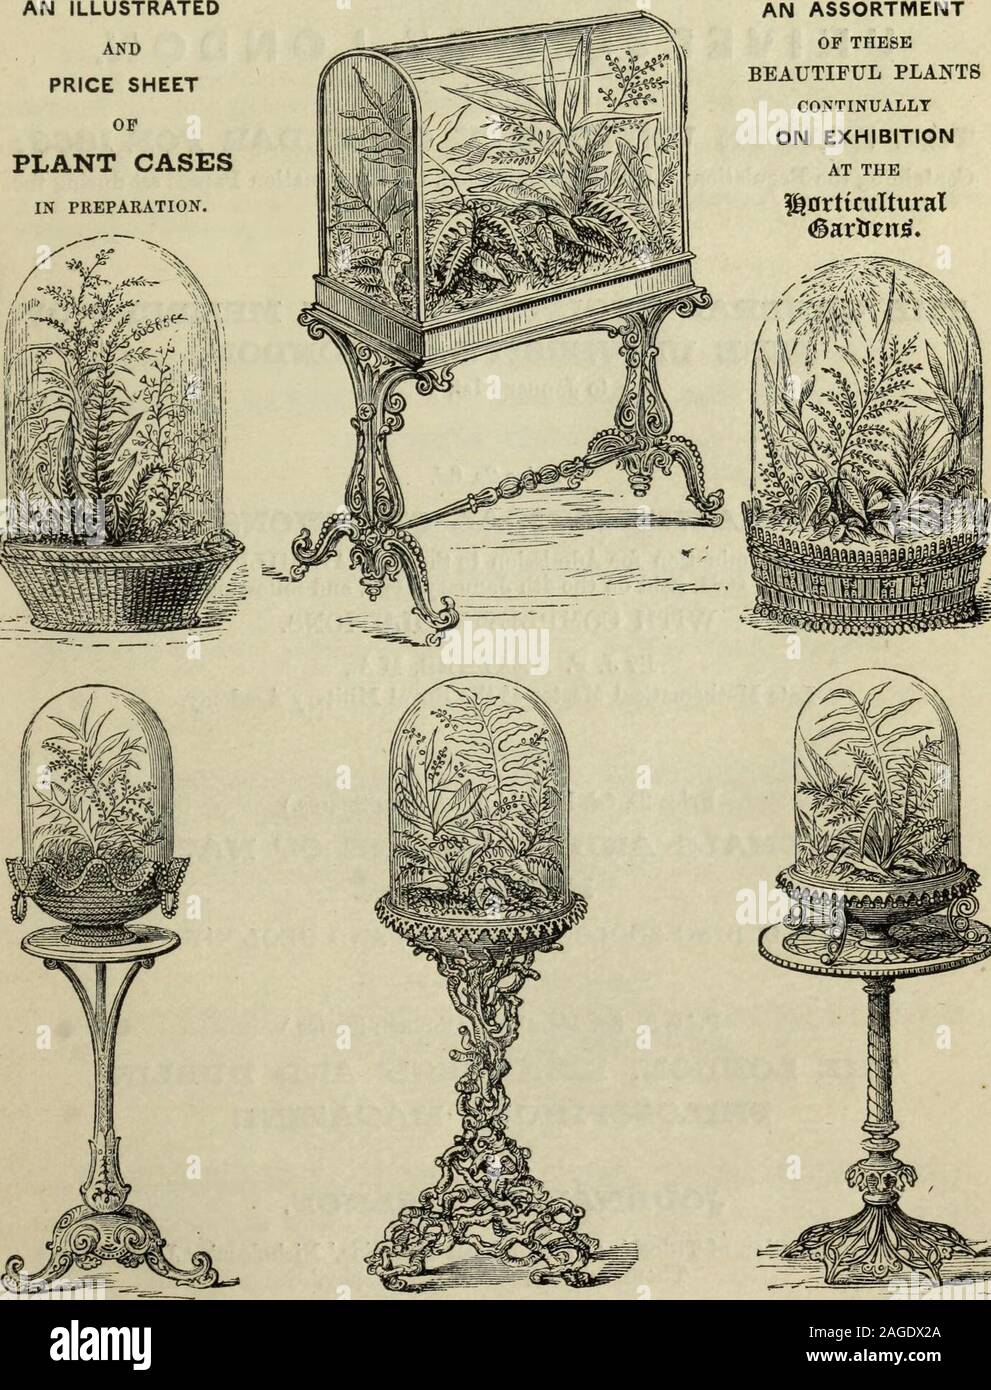 . Journal of the Royal Horticultural Society of London. , Conservatories, Parks, &c.Glass for Table Decoration, Hyacinth Vases, Fern Cases, and Window Conservatories.Articles for Table Decoration, Flower Stands, China Flower Pots, Sec.Glass for Table Decoration. Mintons Majolica Flower Pots, Garden Seats, Glassfor Table Decoration, &c. Decorative Florist, Estimates for Furnishing Con-servatories, Dinners and Balls, &c. Swiss Carvings, Flower Boxes, China Flower Stands,Pots, Jardinieres, &c. Conservatory Architects, Horticultural Builders,and Hot-water Apparatus Manufacturers. Hot-water Apparat Stock Photo